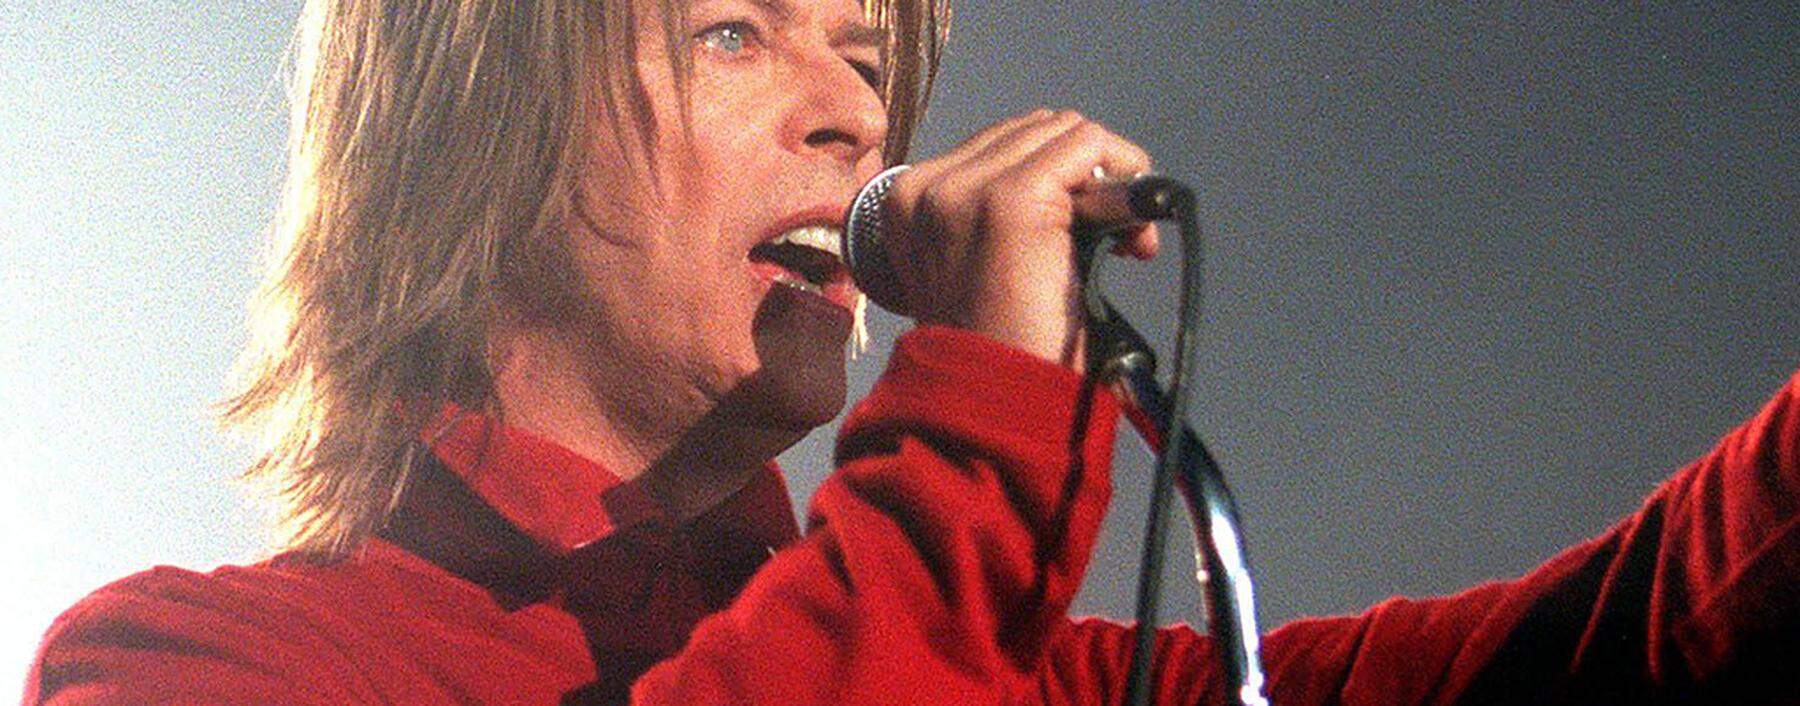 FILES-BRITAIN-MUSIC-OBIT-PEOPLE-BOWIE